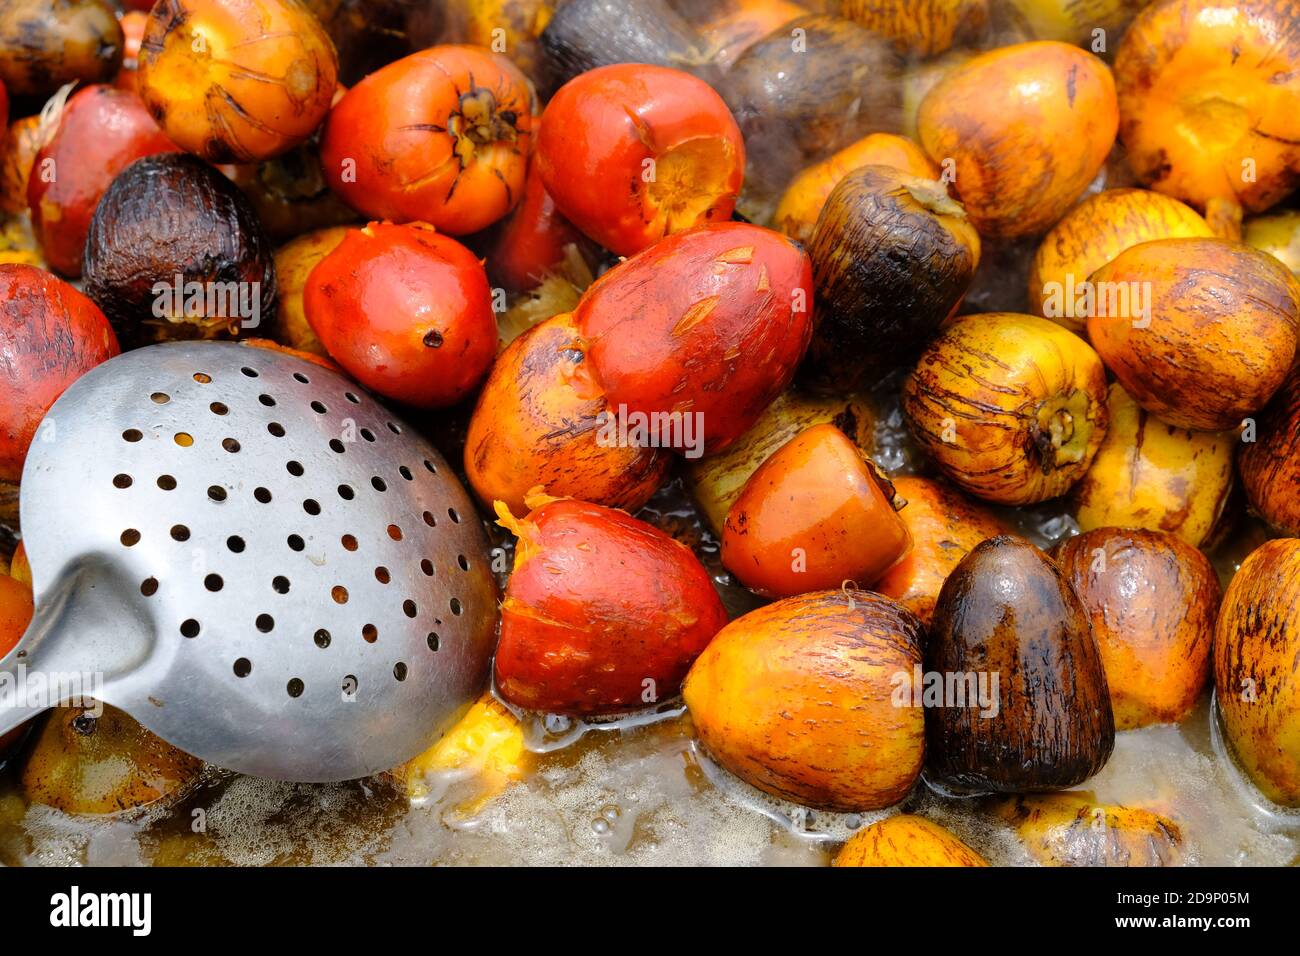 Costa Rica Arenal Volcano and La Fortuna - Cooked Peach palm fruit - Bactris gasipaes - Pejibaye Stock Photo